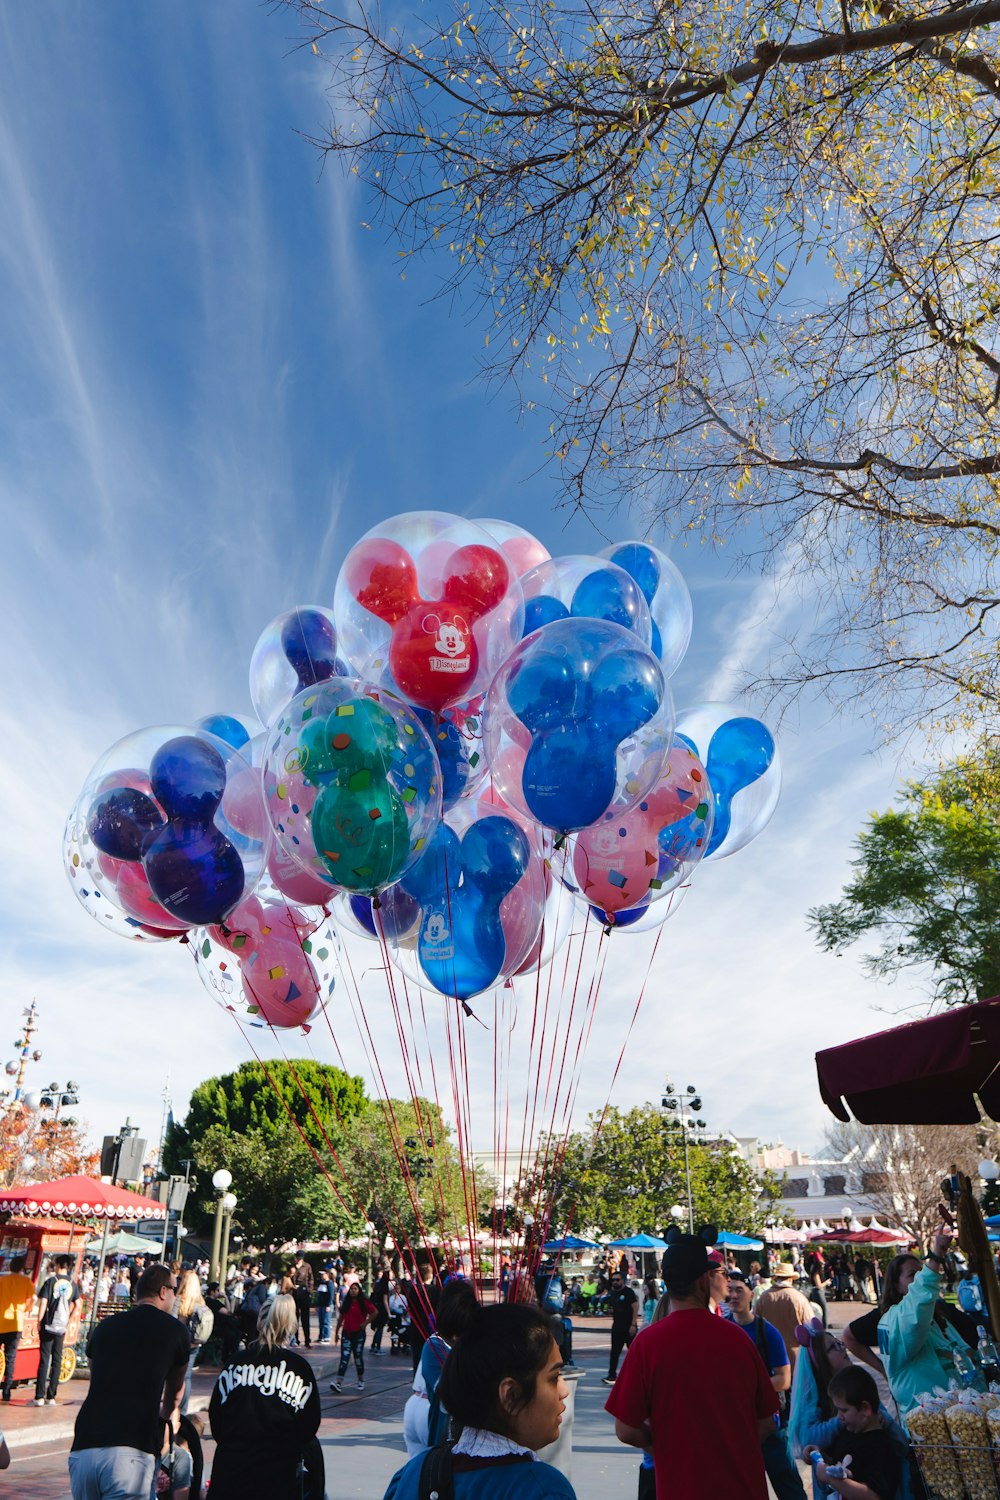 red blue and yellow balloons on air under blue sky during daytime